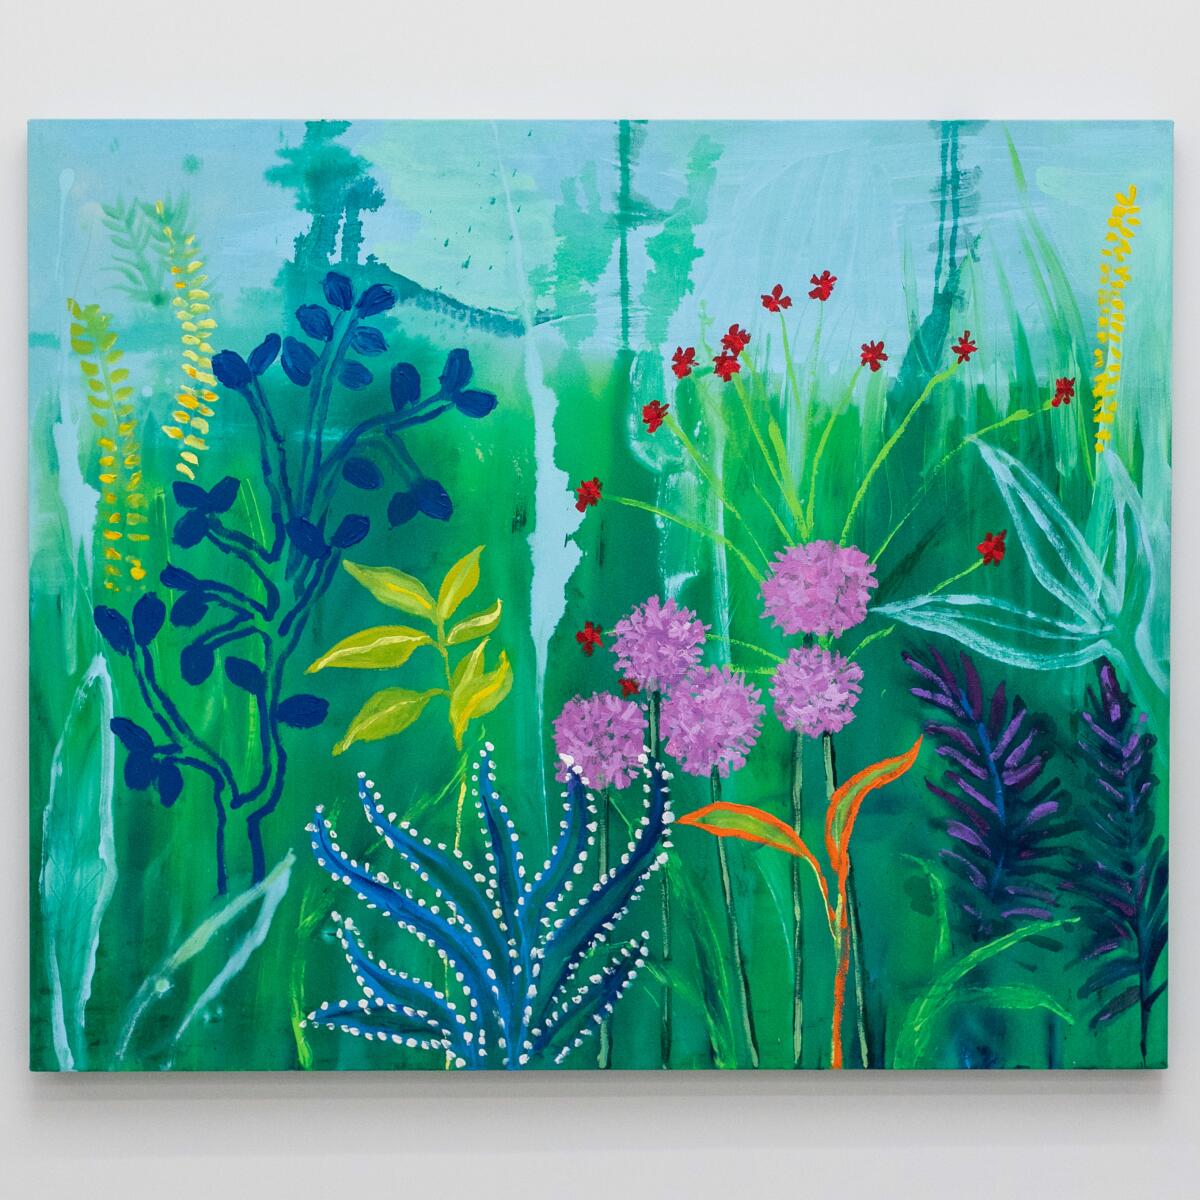 A painting featuring flowers growing out of a grassy field, with a blue sky in the background.